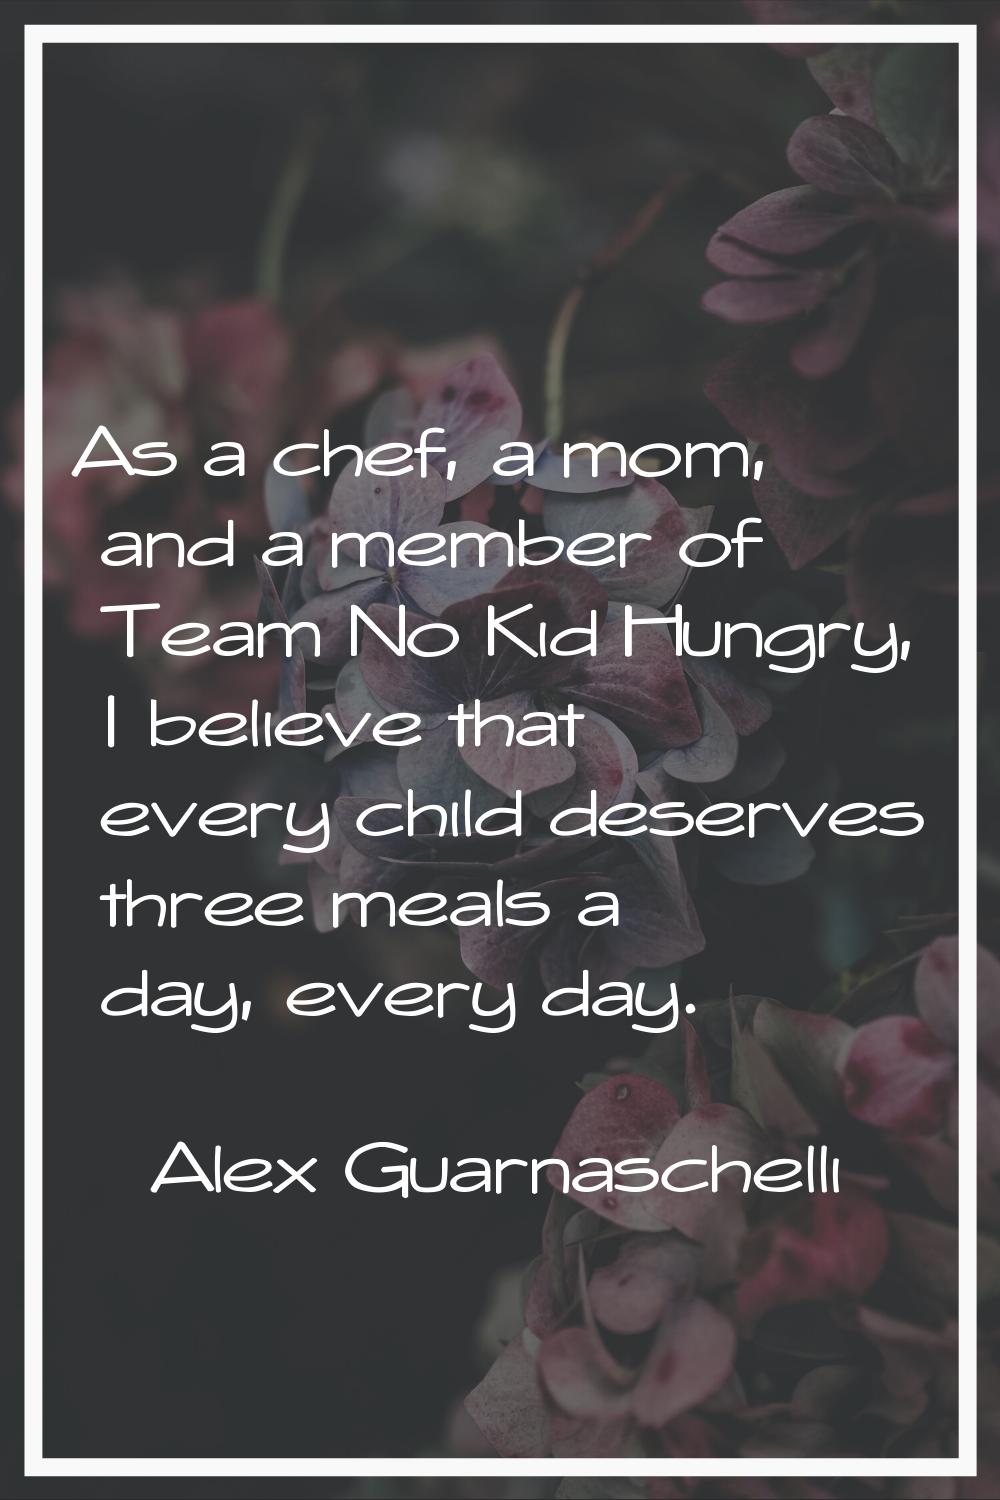 As a chef, a mom, and a member of Team No Kid Hungry, I believe that every child deserves three mea